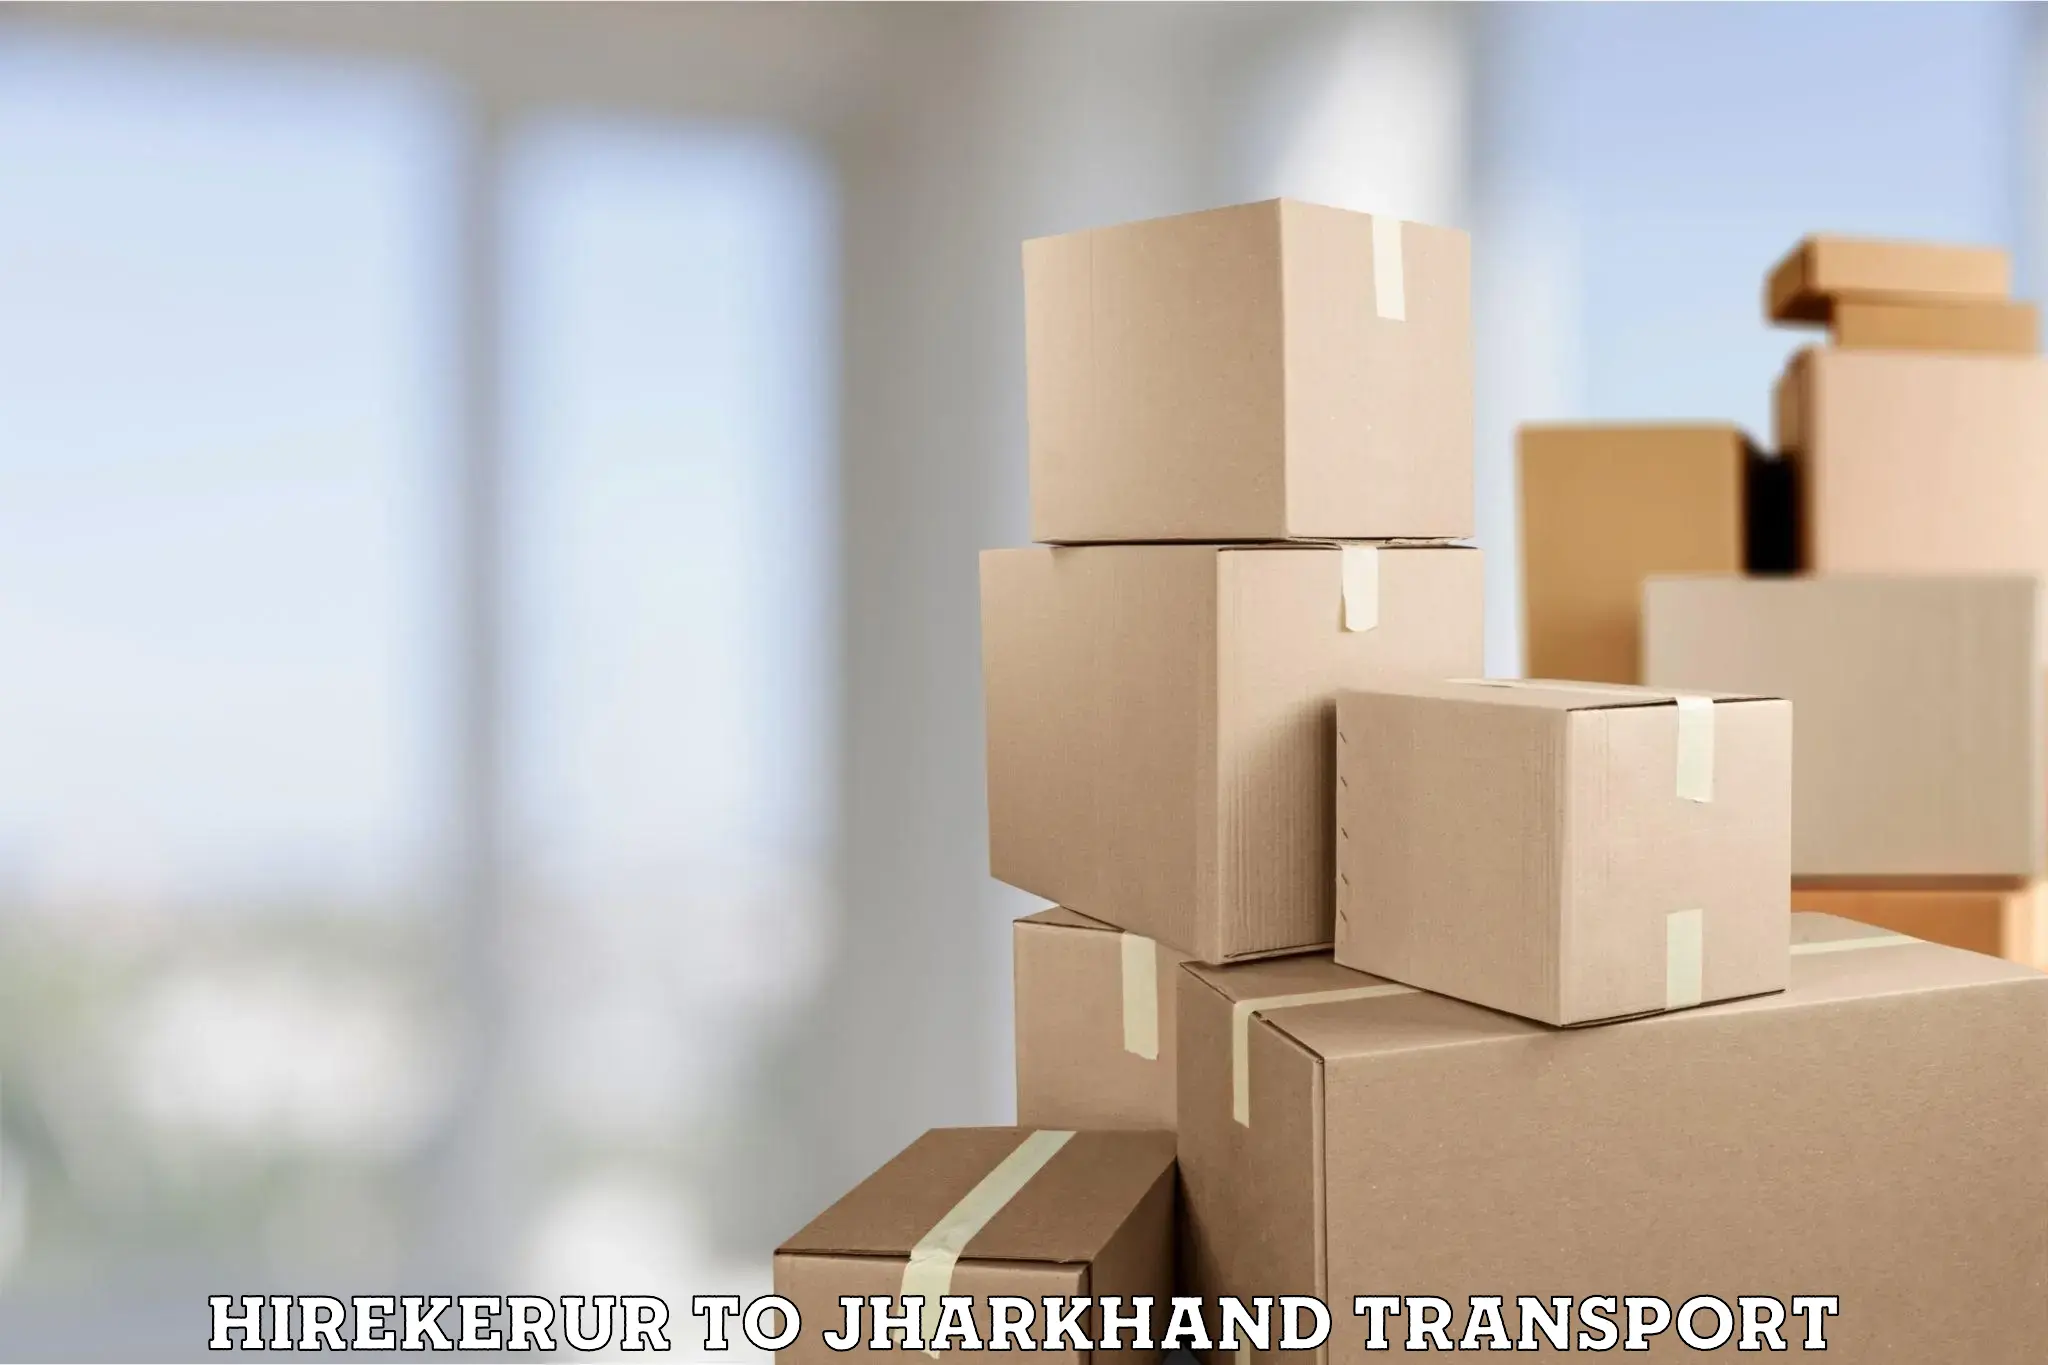 Nationwide transport services Hirekerur to Jharia